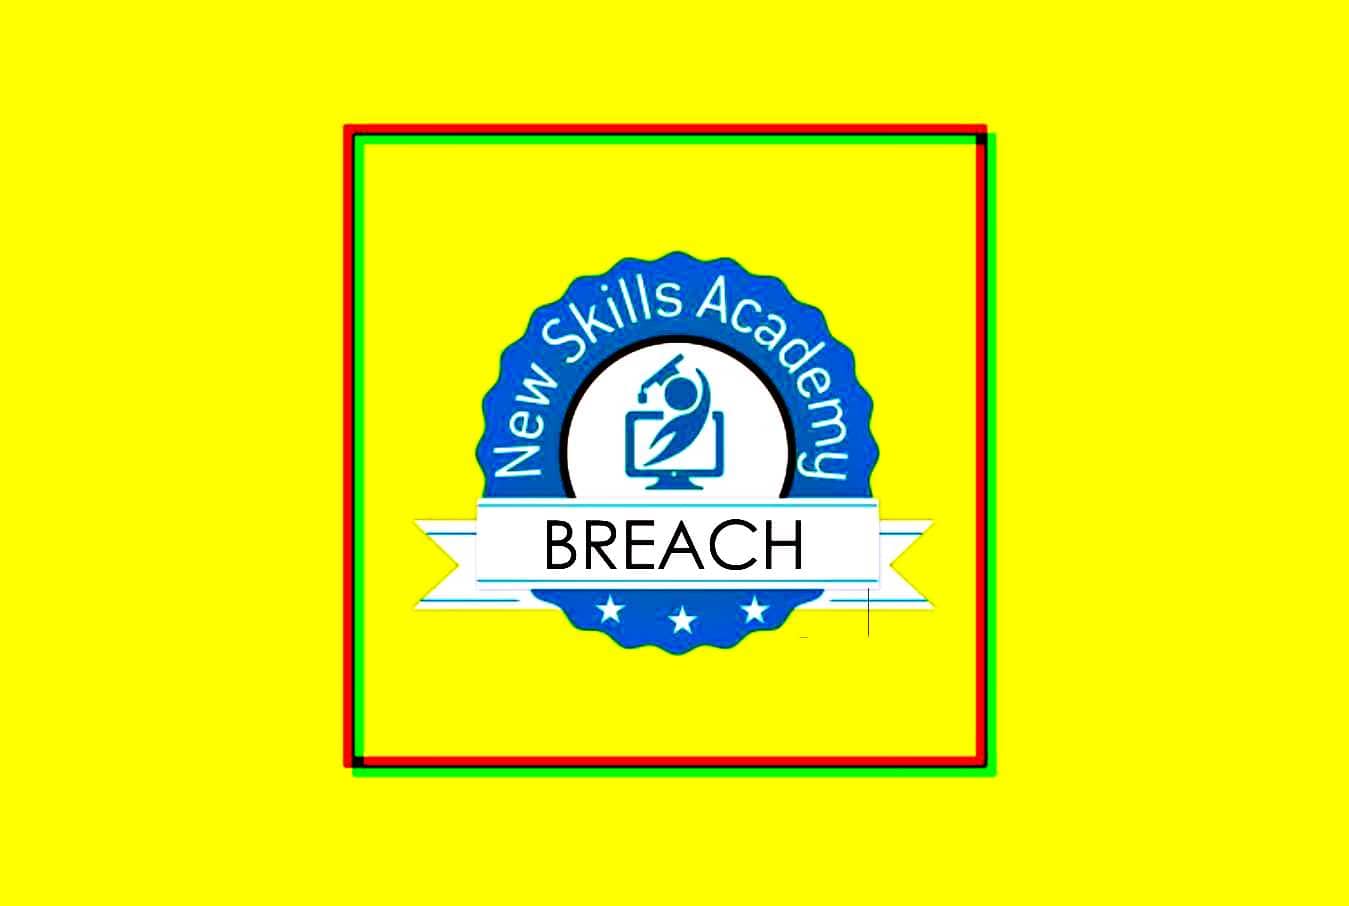 Online learning provider New Skills Academy alerts users of data breach